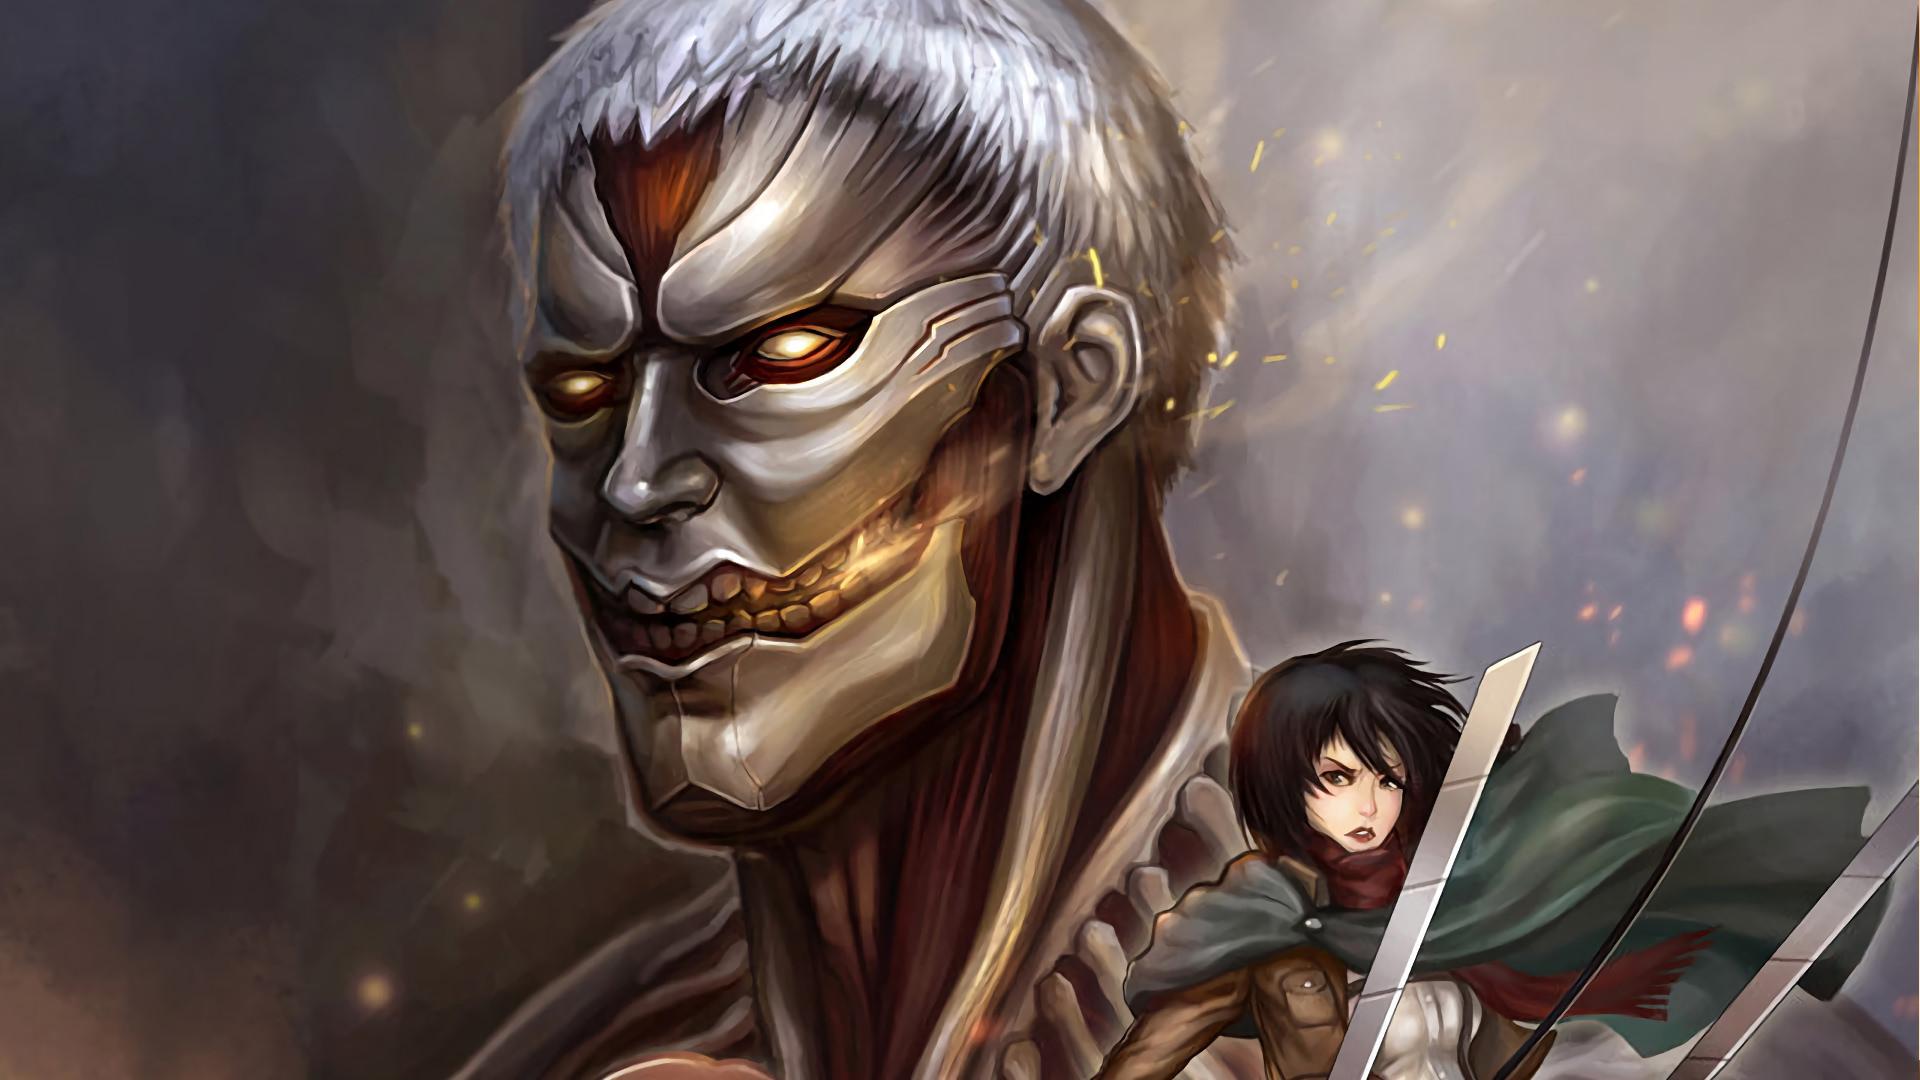 Download Armored Titan wallpapers for mobile phone free Armored Titan  HD pictures